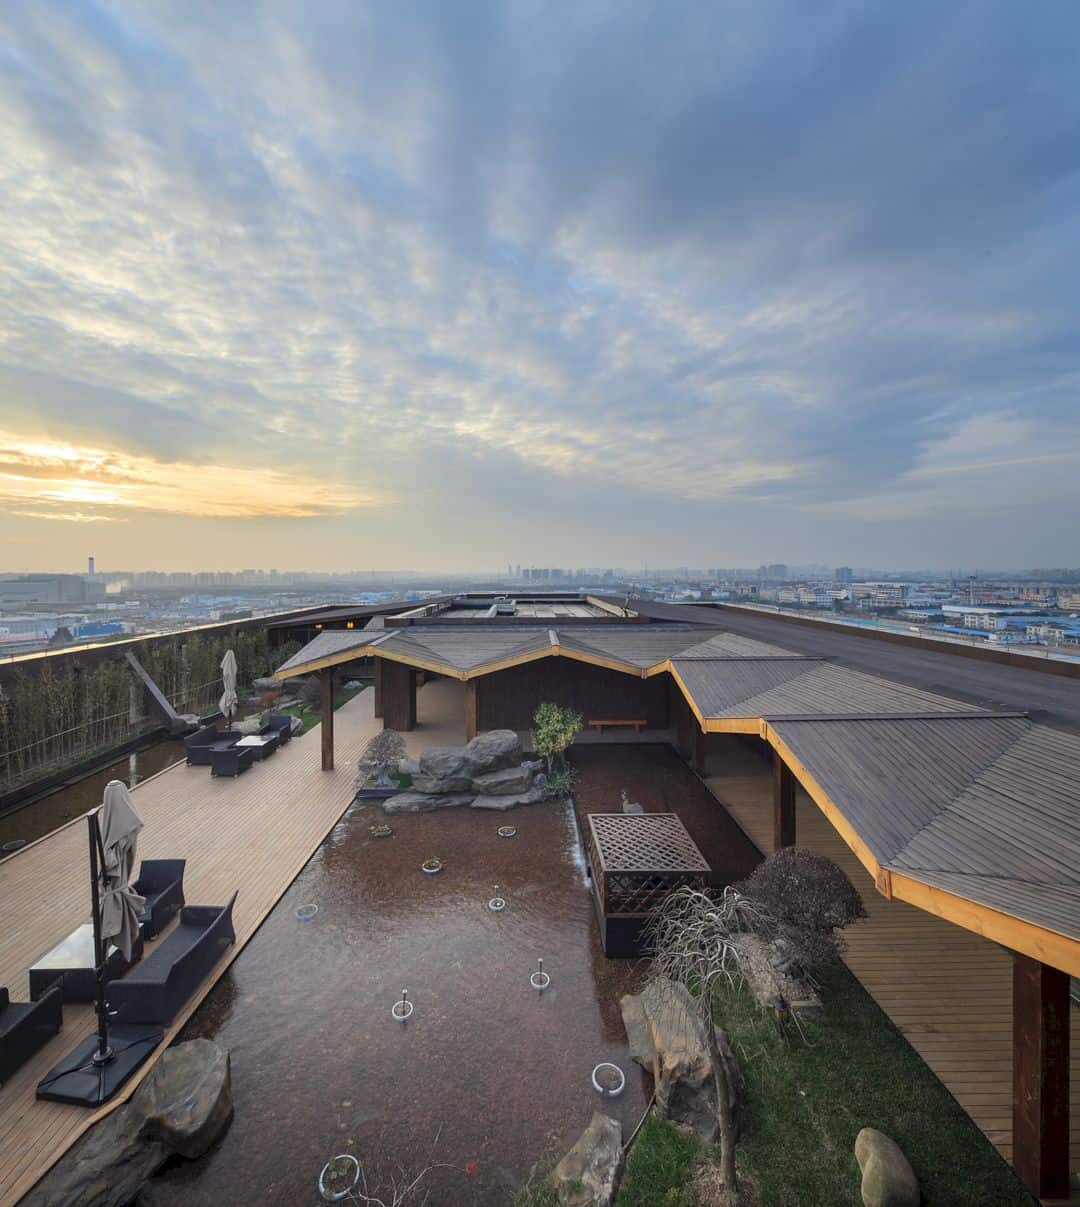 Gris Headquarters Roof Garden A Peaceful And Harmonious Industrial Economy Park In Shanghai 12